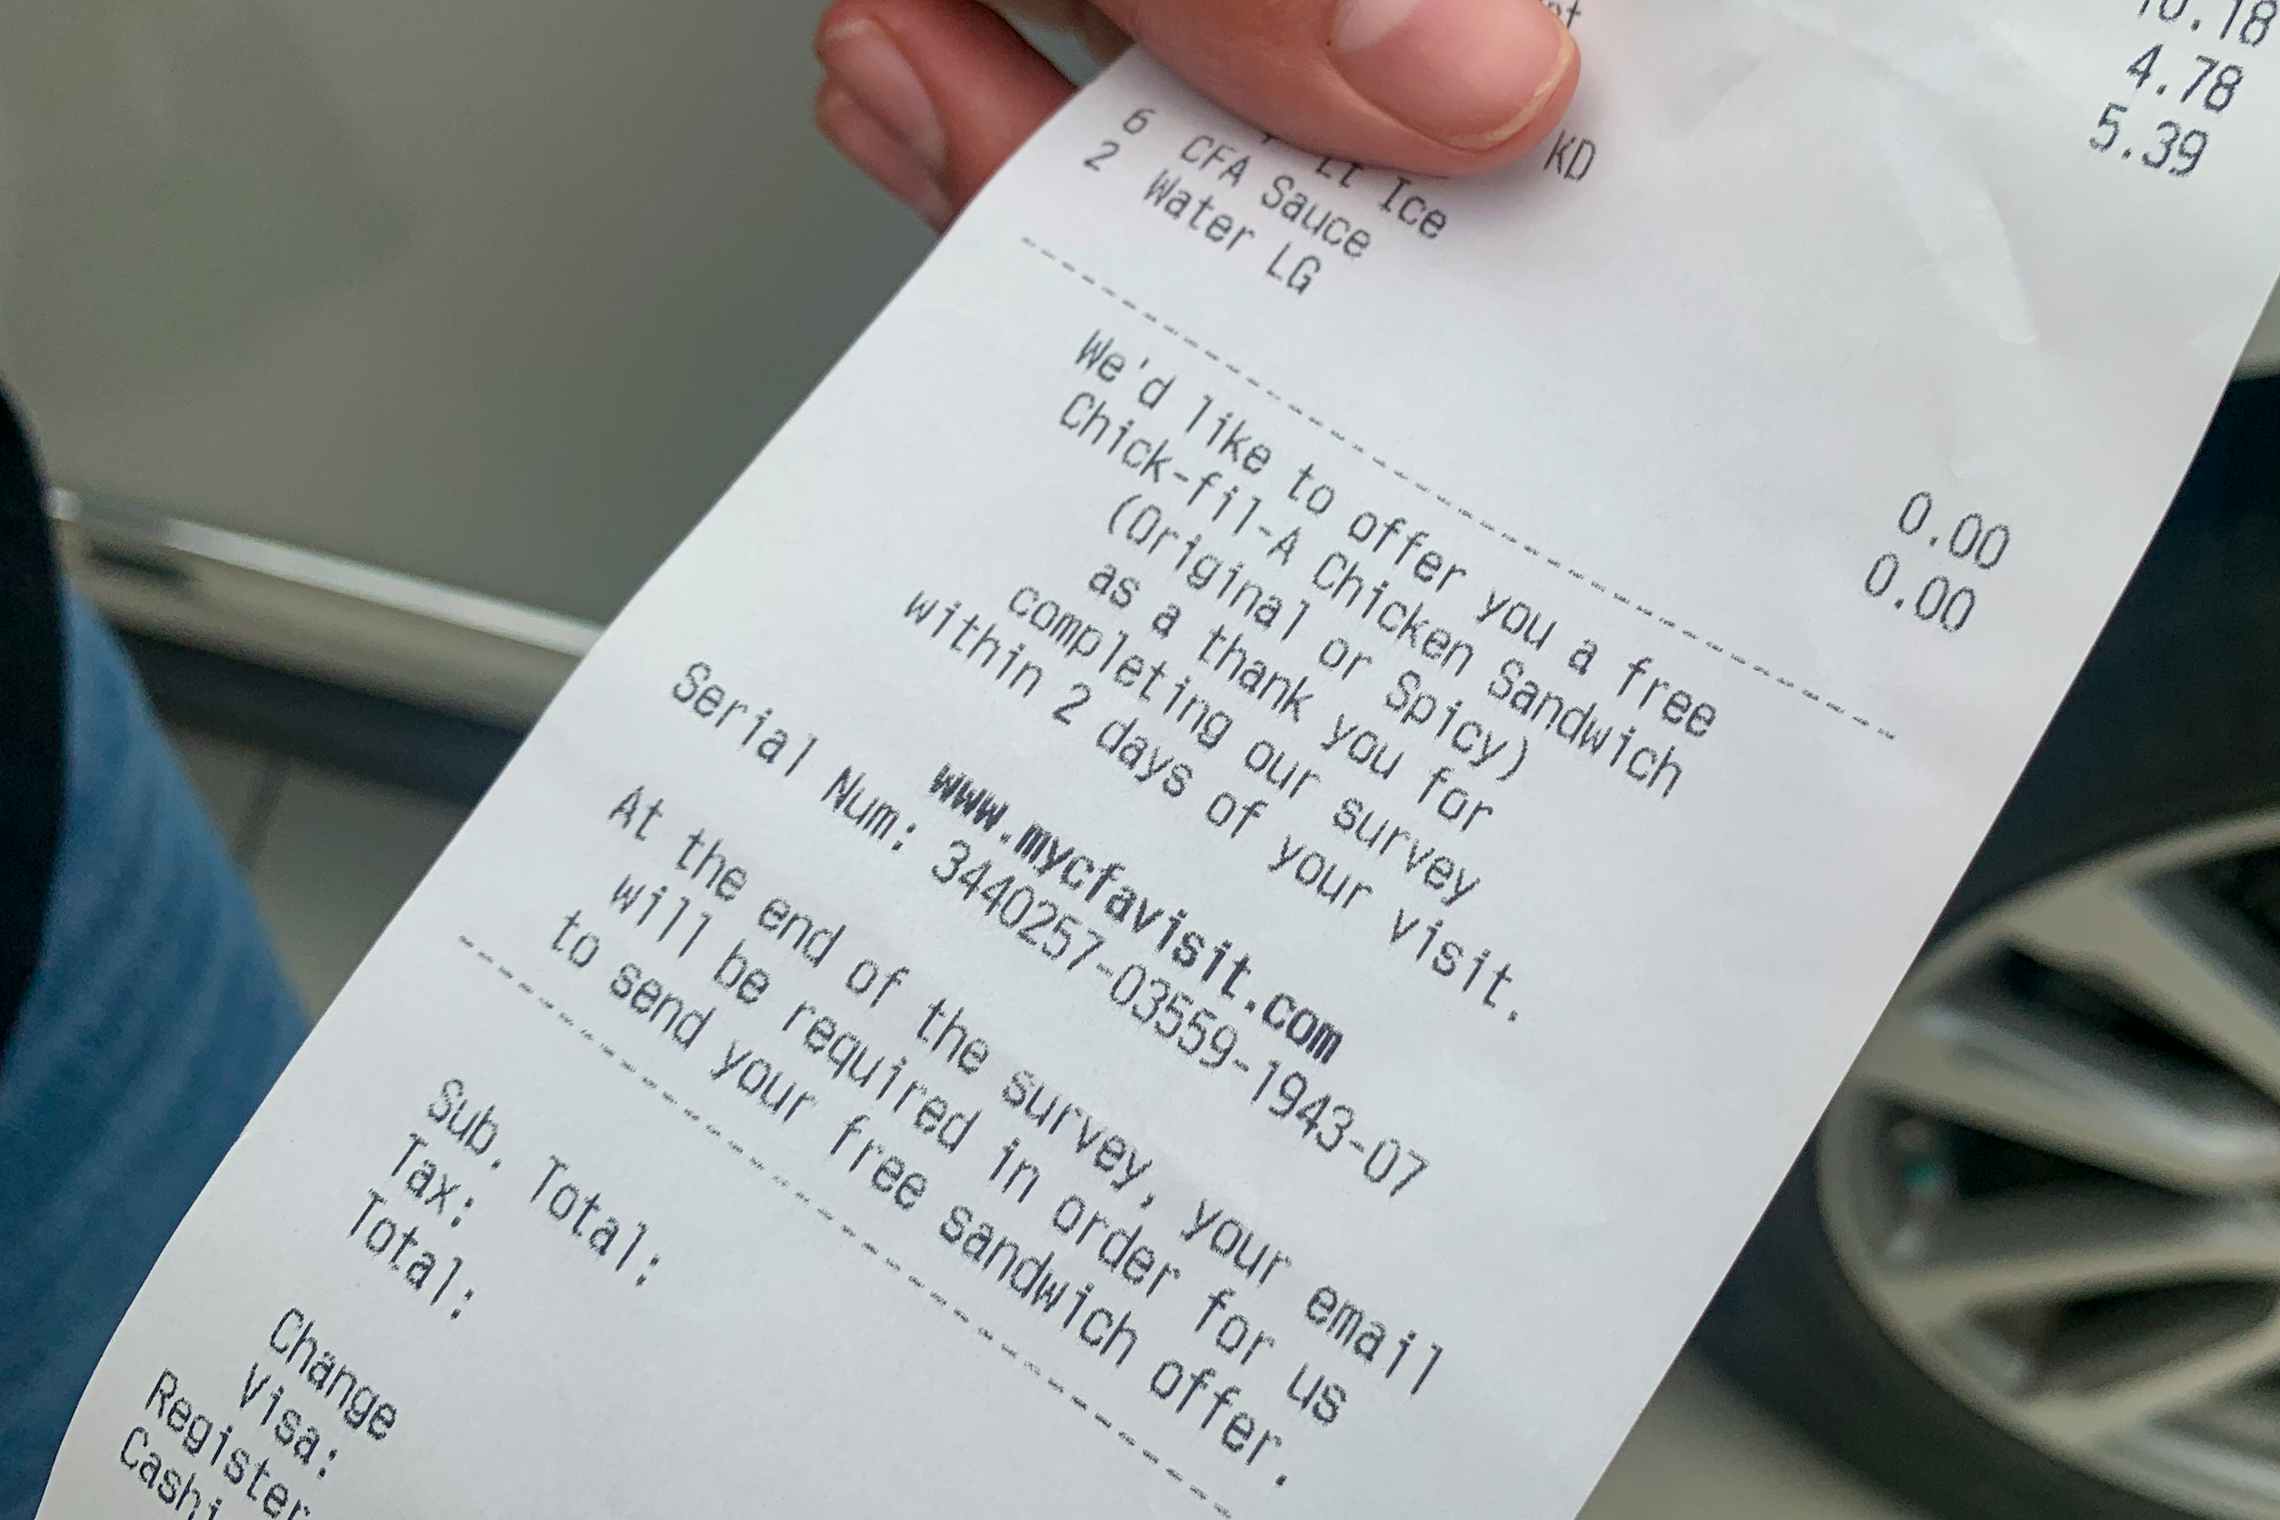 A chick-fil-a receipt with a survey for a free chicken sandwich on it.